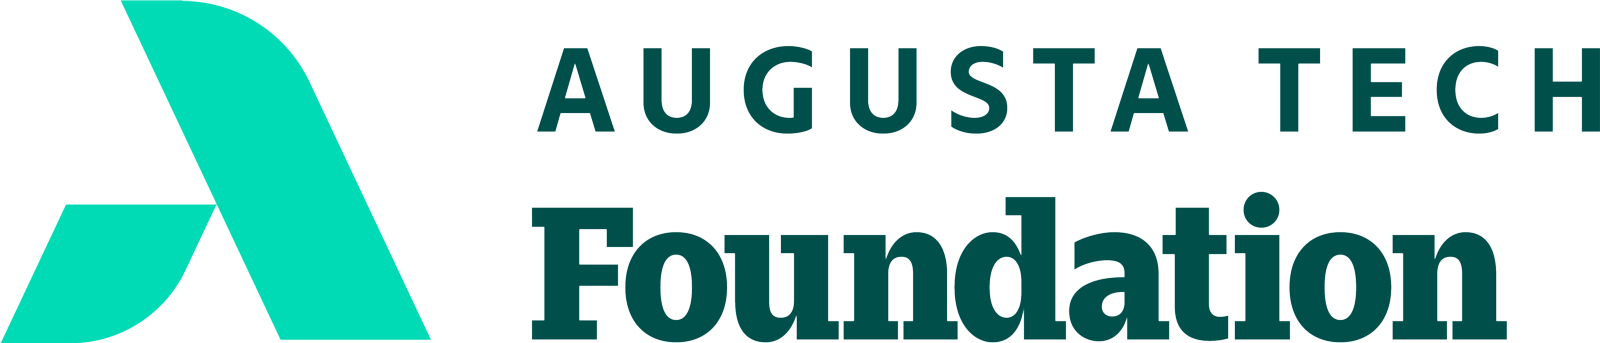 An uppercase abstract A in Mint Green composed of a smaller leg representing Augusta Technical College supporting the larger leg representing the Augusta Community and economy. The words Augusta Tech are stacked horizontally above the bolded word foundation in heritage green font to the right of the A.